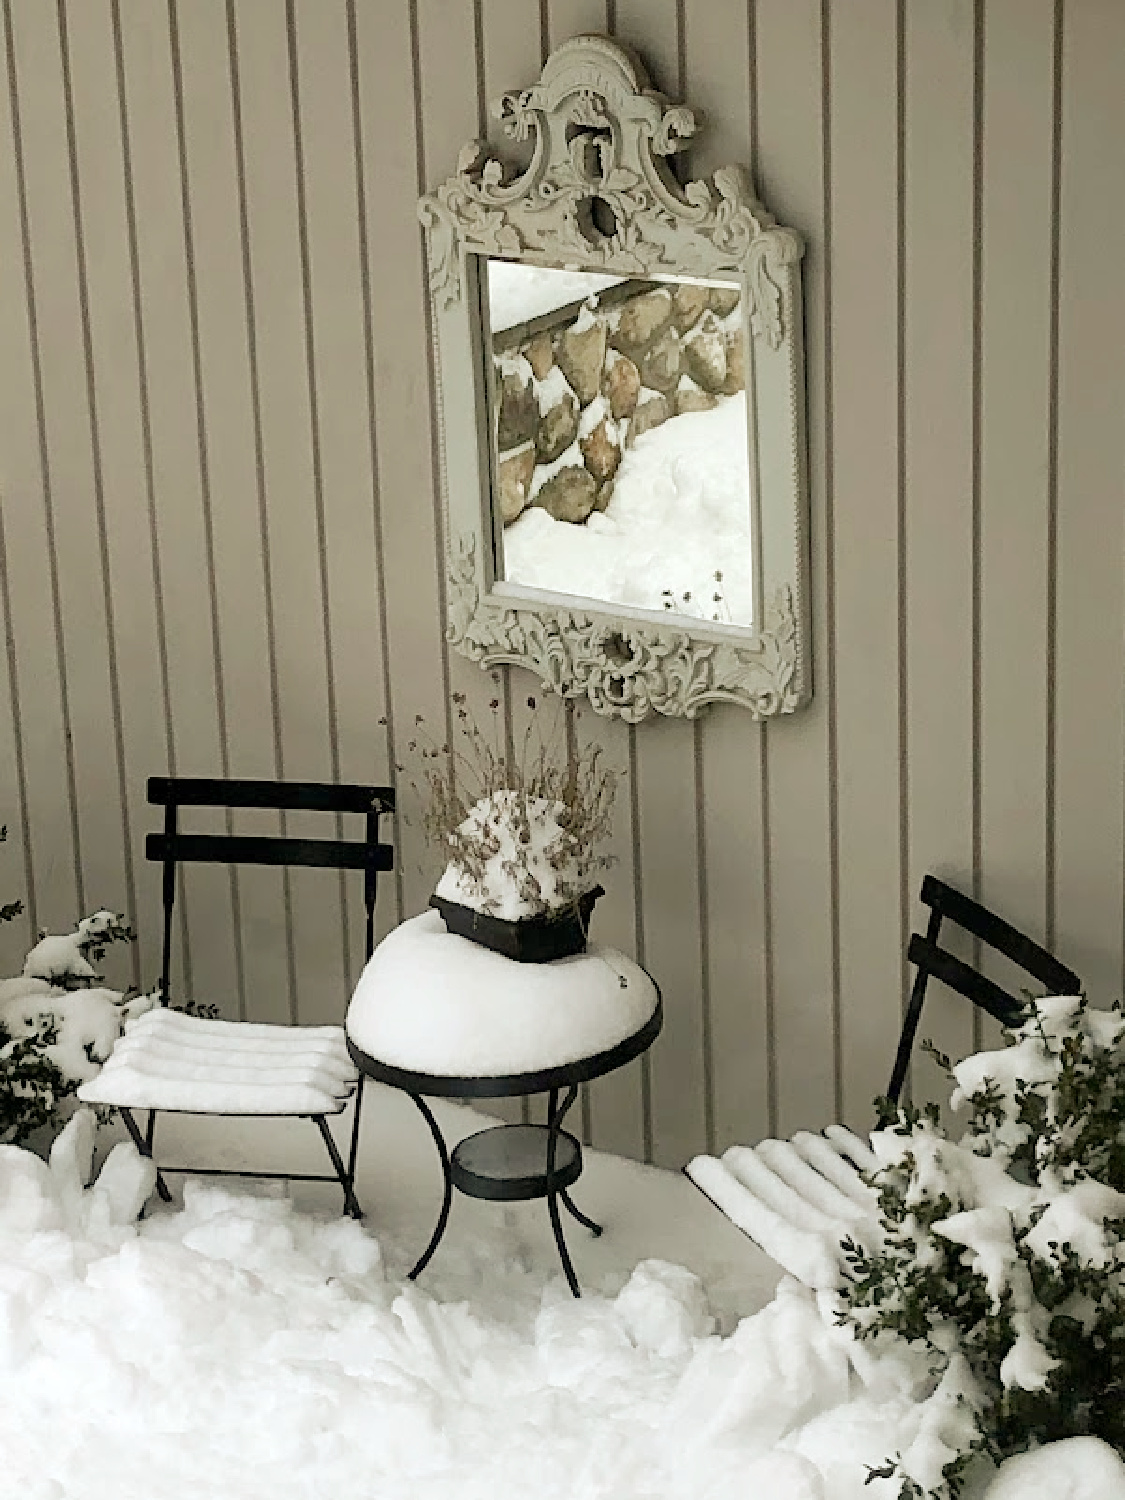 Hello Lovely's snowy French country courtyard with bistro set and ornate mirror. #hellolovelychristmas